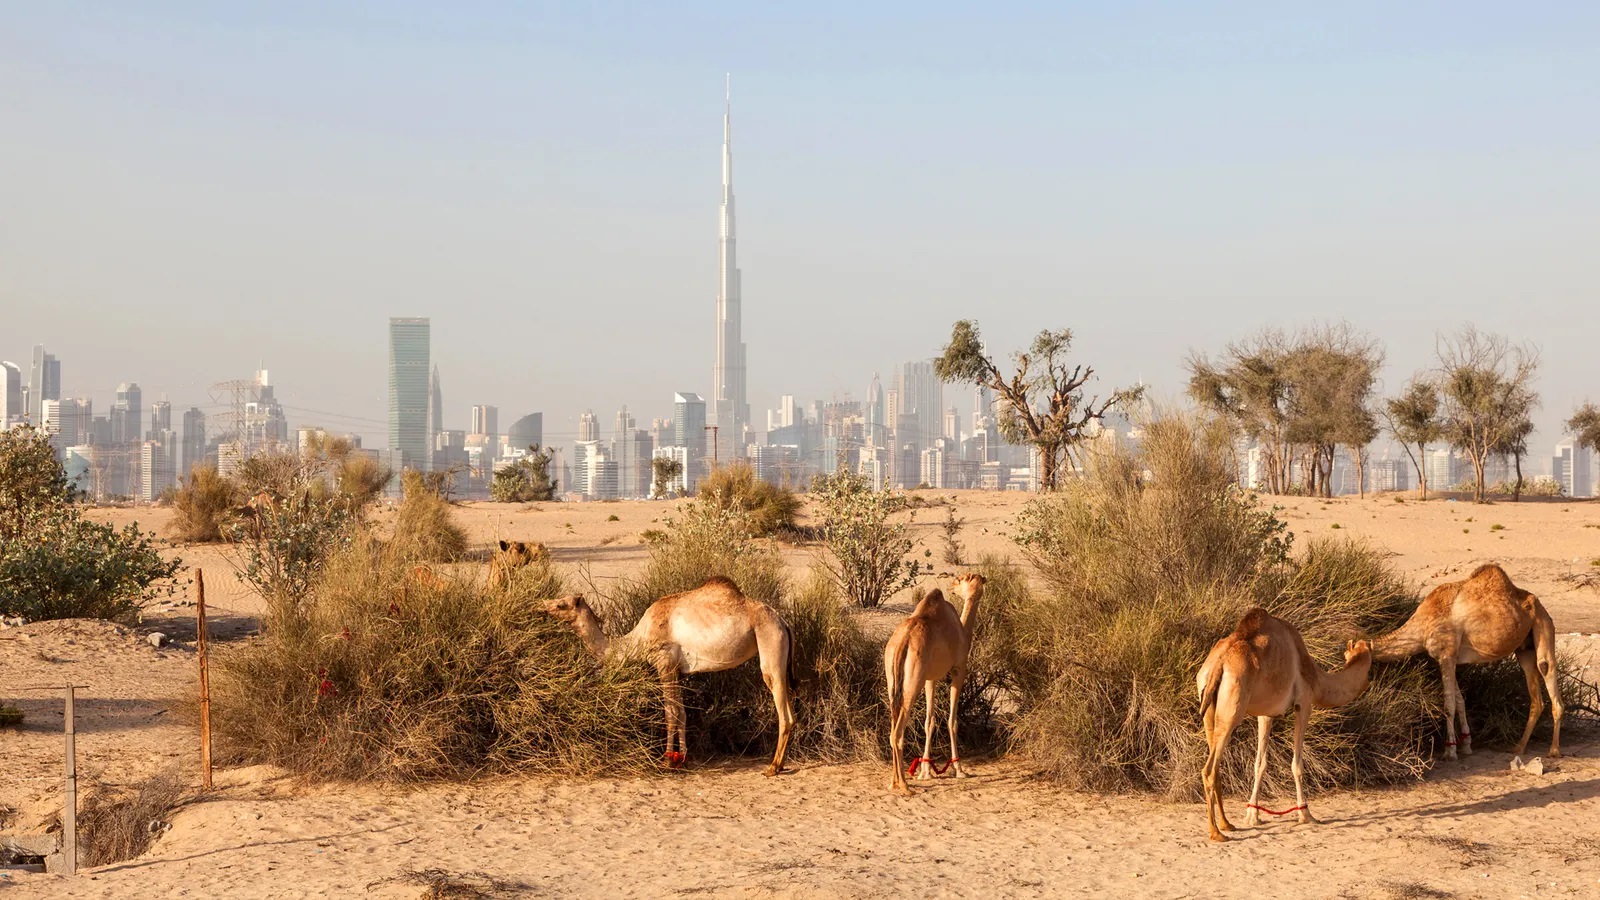 Camels in the deserts of Dubai